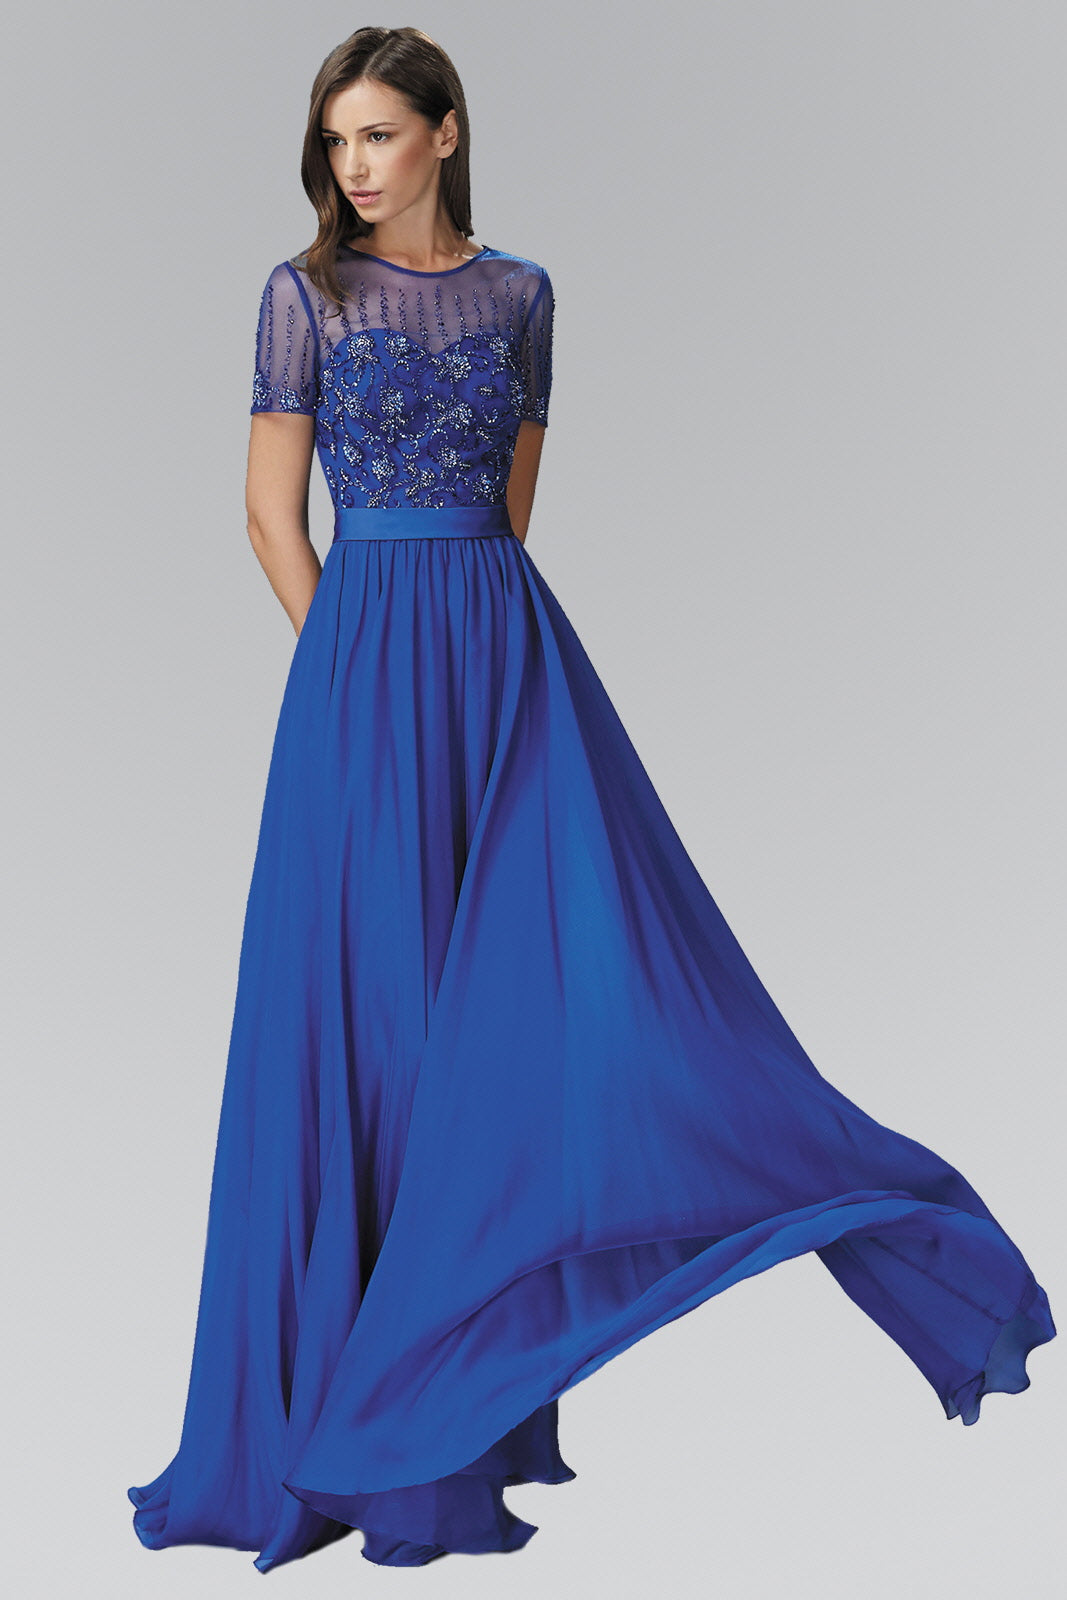 GLS COLLECTIVE - GL2042 - Royal blue Size M Long Prom / Mother of Bride / Bridesmaid Dress